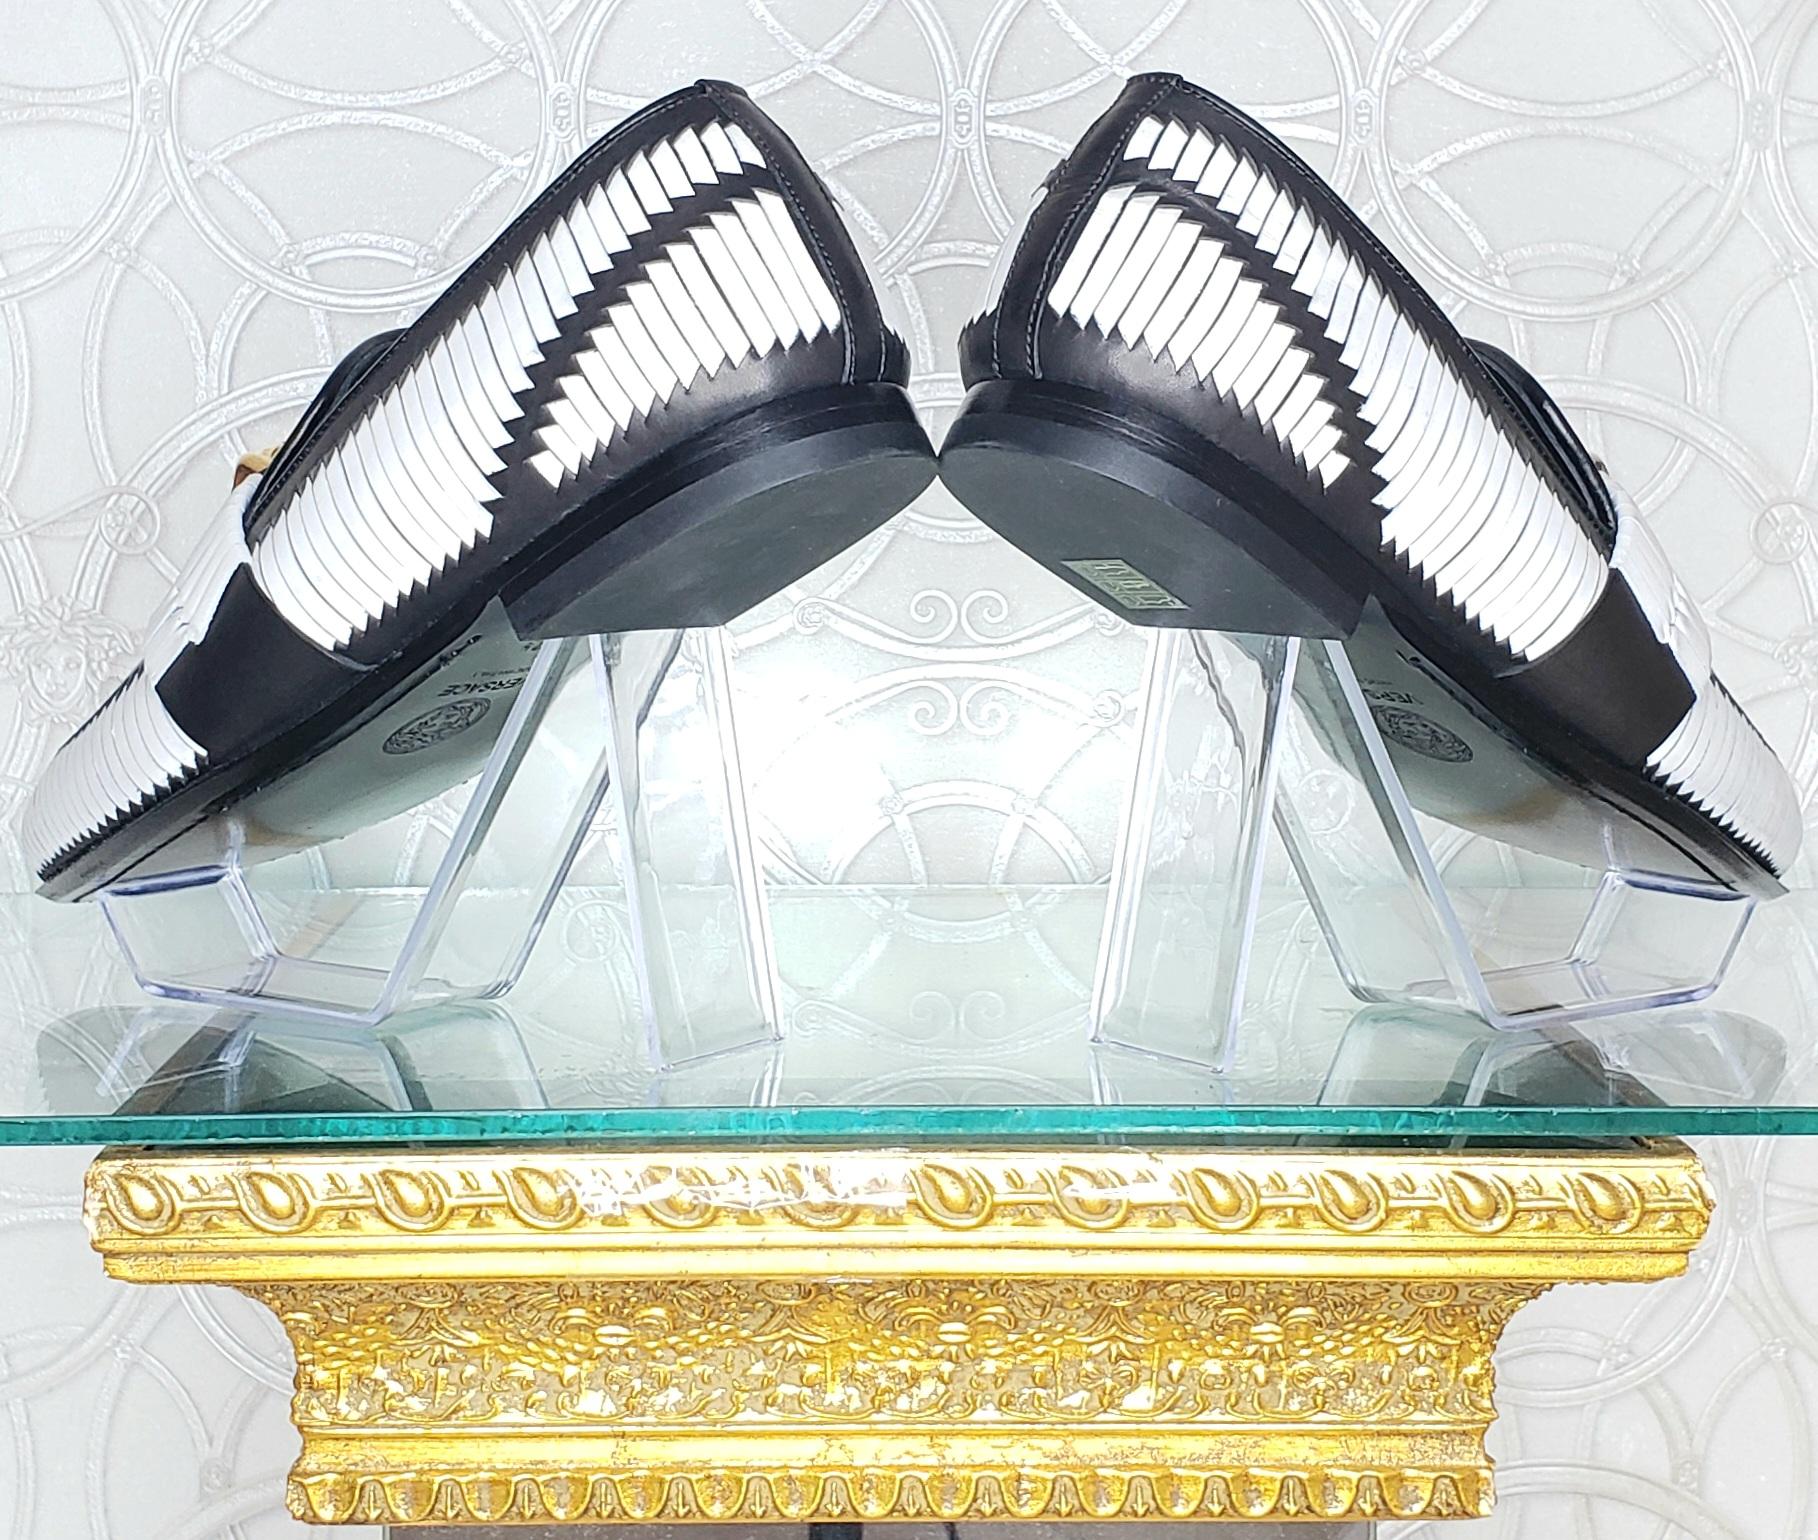 S/S 2015 Look # 38 VERSACE WOVEN BICOLOR LOAFERS Size 42.5 - 9.5 For Sale 4